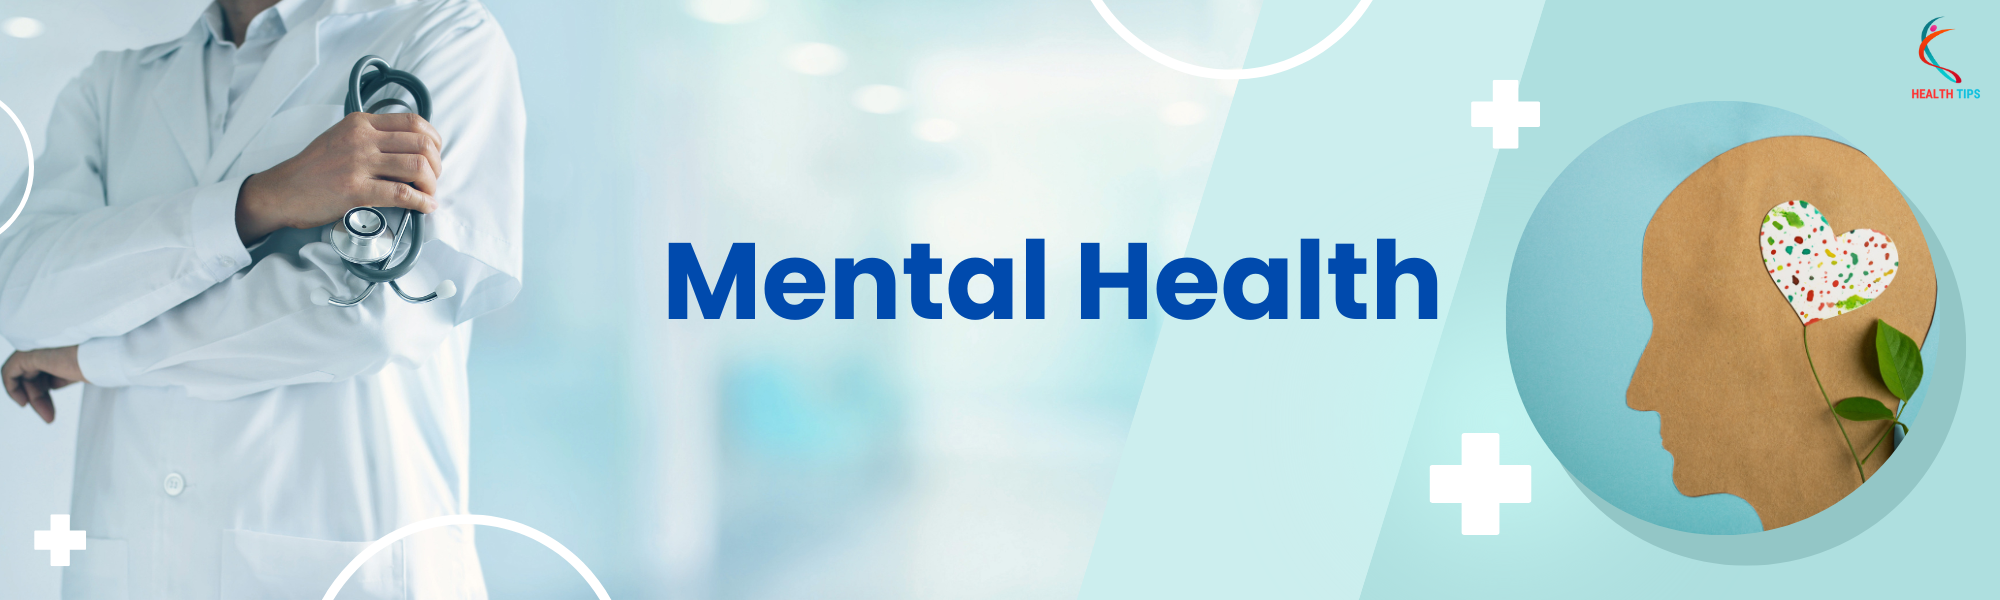 Mental Health _ Health Tips for All